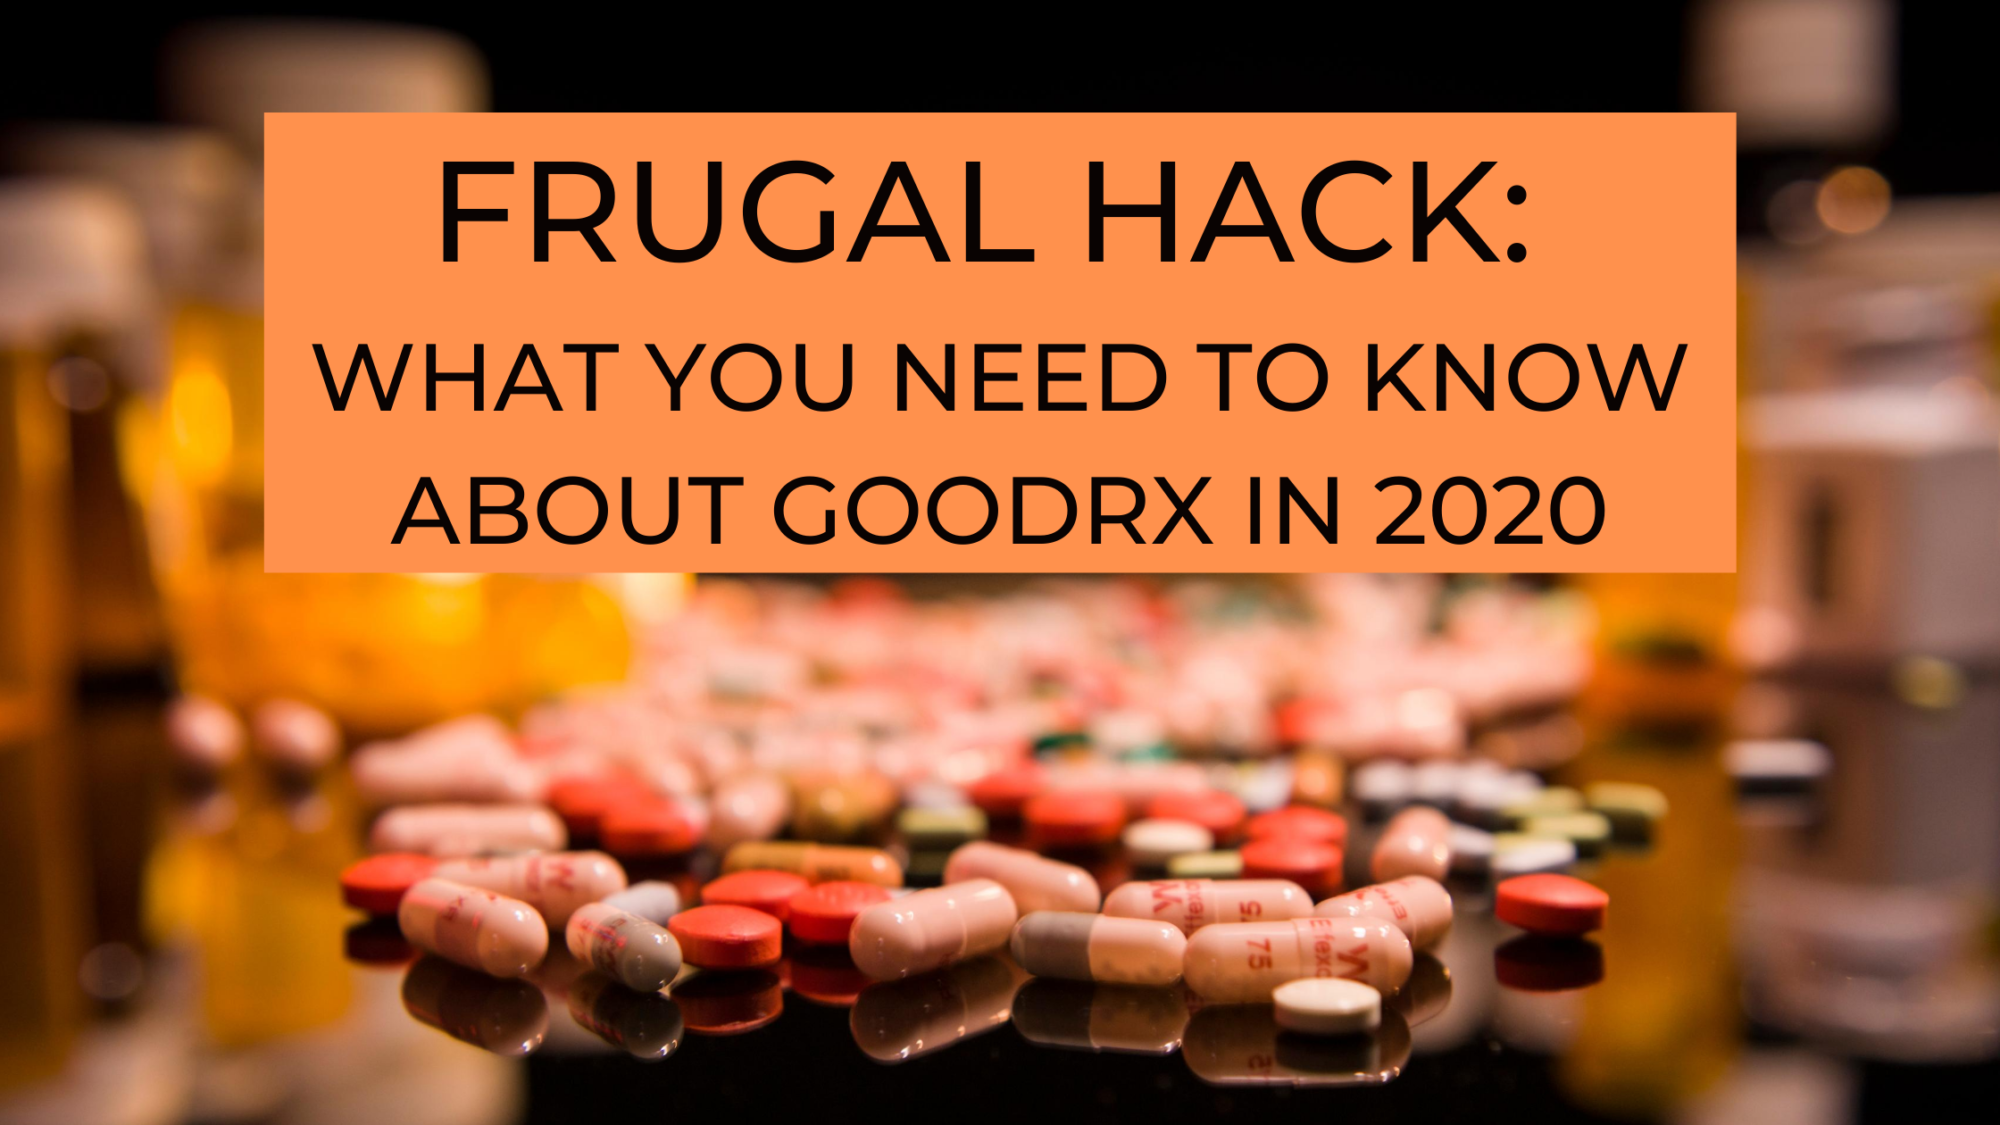 SAVE MONEY ON PRESCRIPTION DRUGS WITH GOODRX